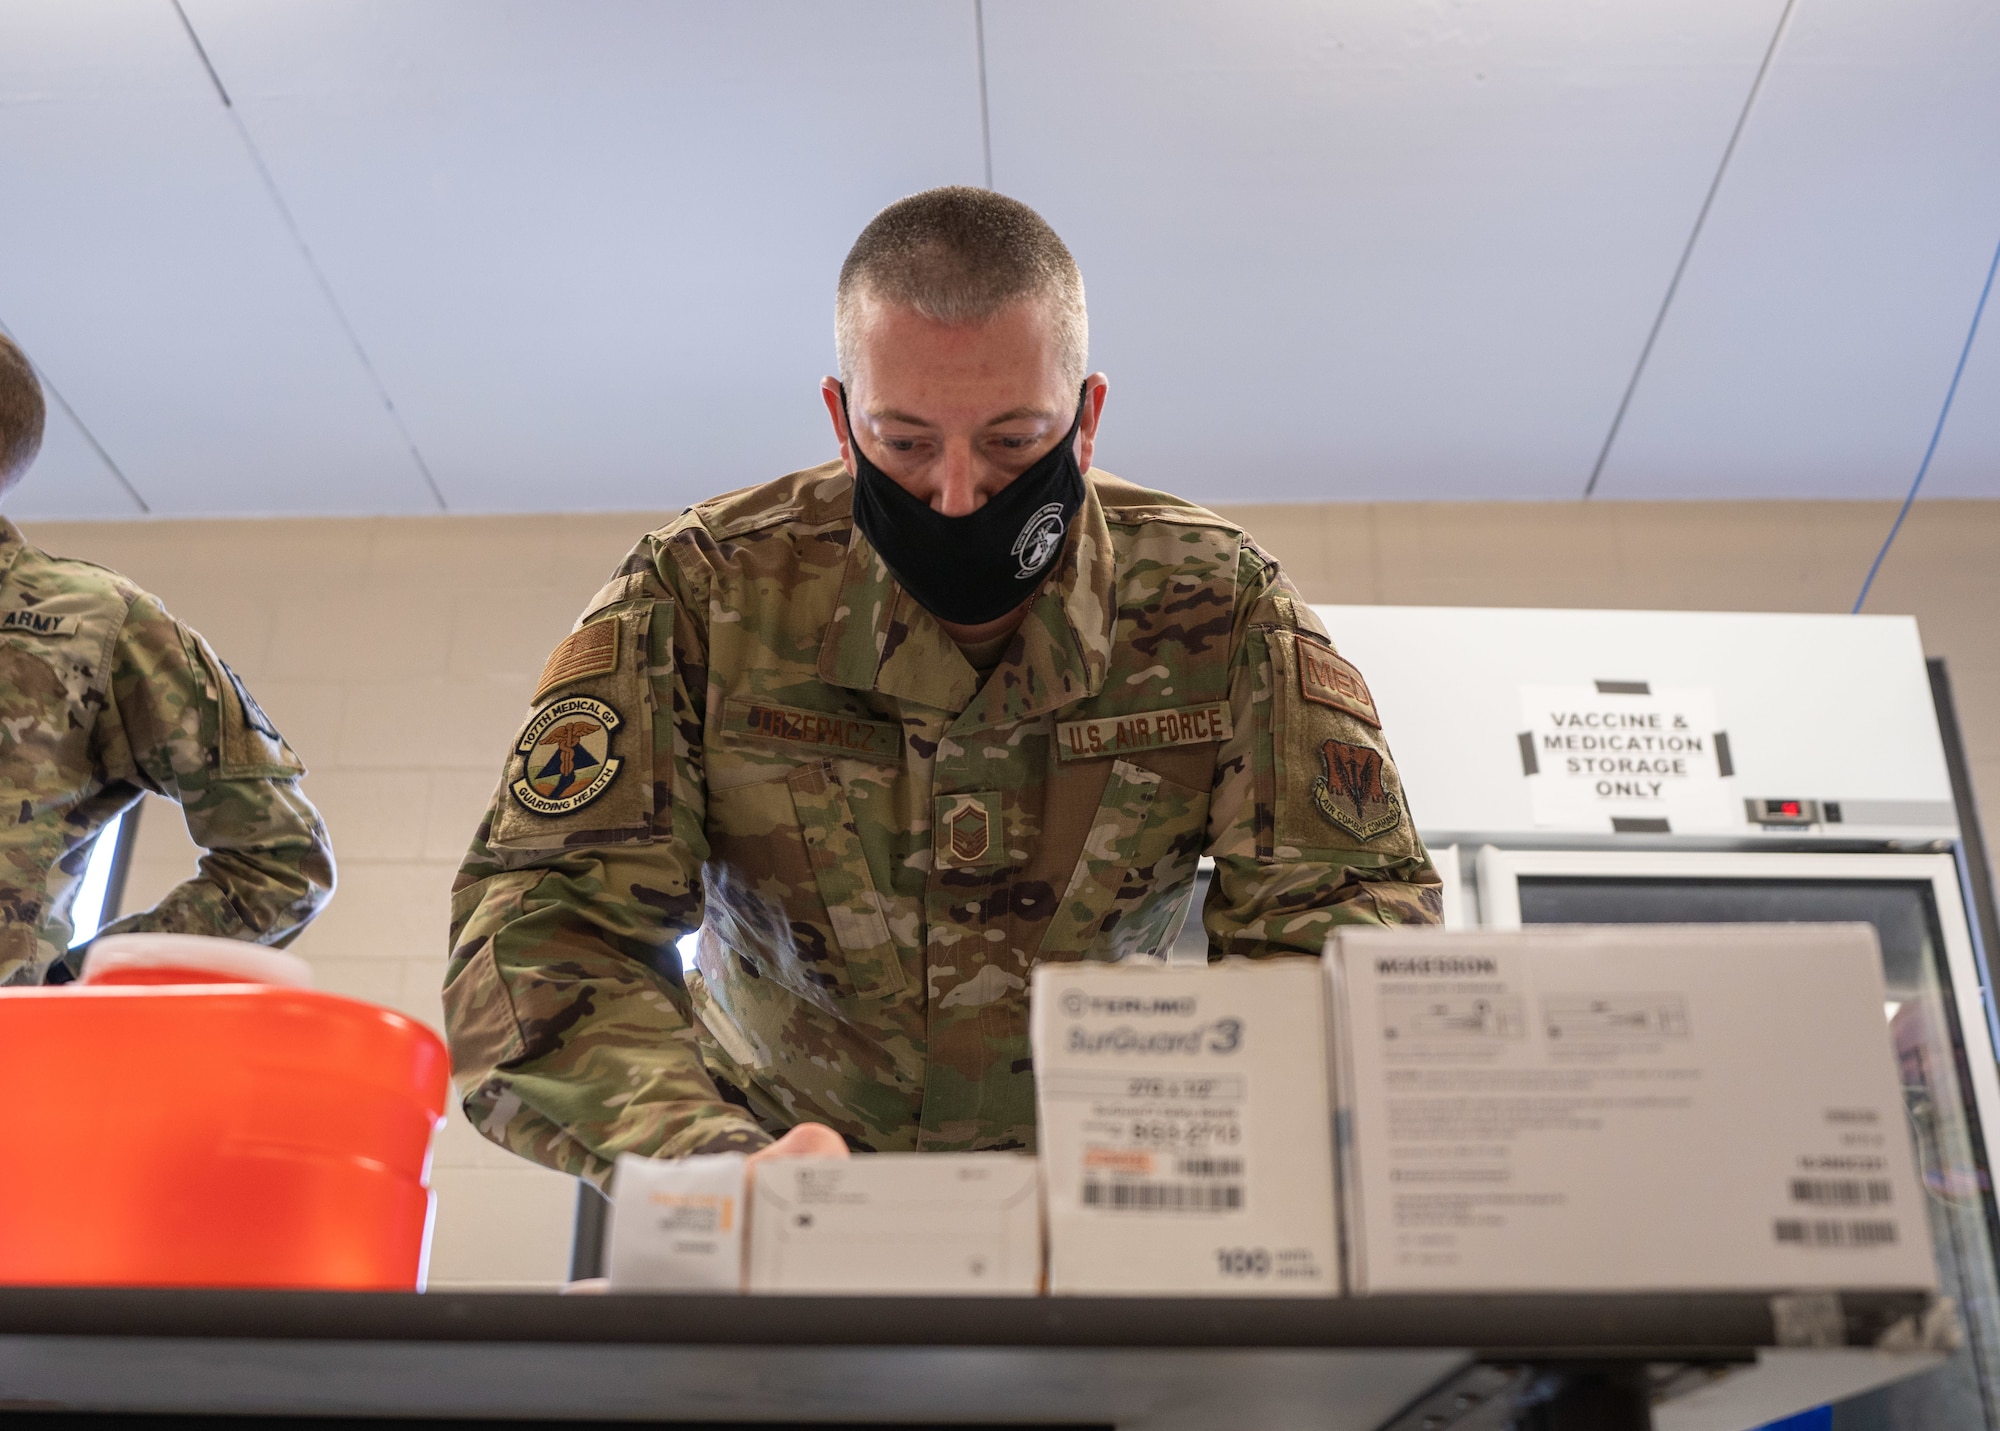 U.S. Air Force Senior Master Sgt. Donald Trzepacz, assigned to Joint Task Force COVID-19, New York National Guard, prepares the COVID-19 vaccination area at the Camp Smith Training Site Medical Readiness Clinic, N.Y., on December 16, 2020. The New York National Guard is participating in a Department of Defense vaccine pilot program in which 44,000 doses of the Pfizer vaccine are being administered to front line medical personnel at 16 locations around the world. (U.S. Army National Guard photo by Sgt. Sebastian Rothwyn)